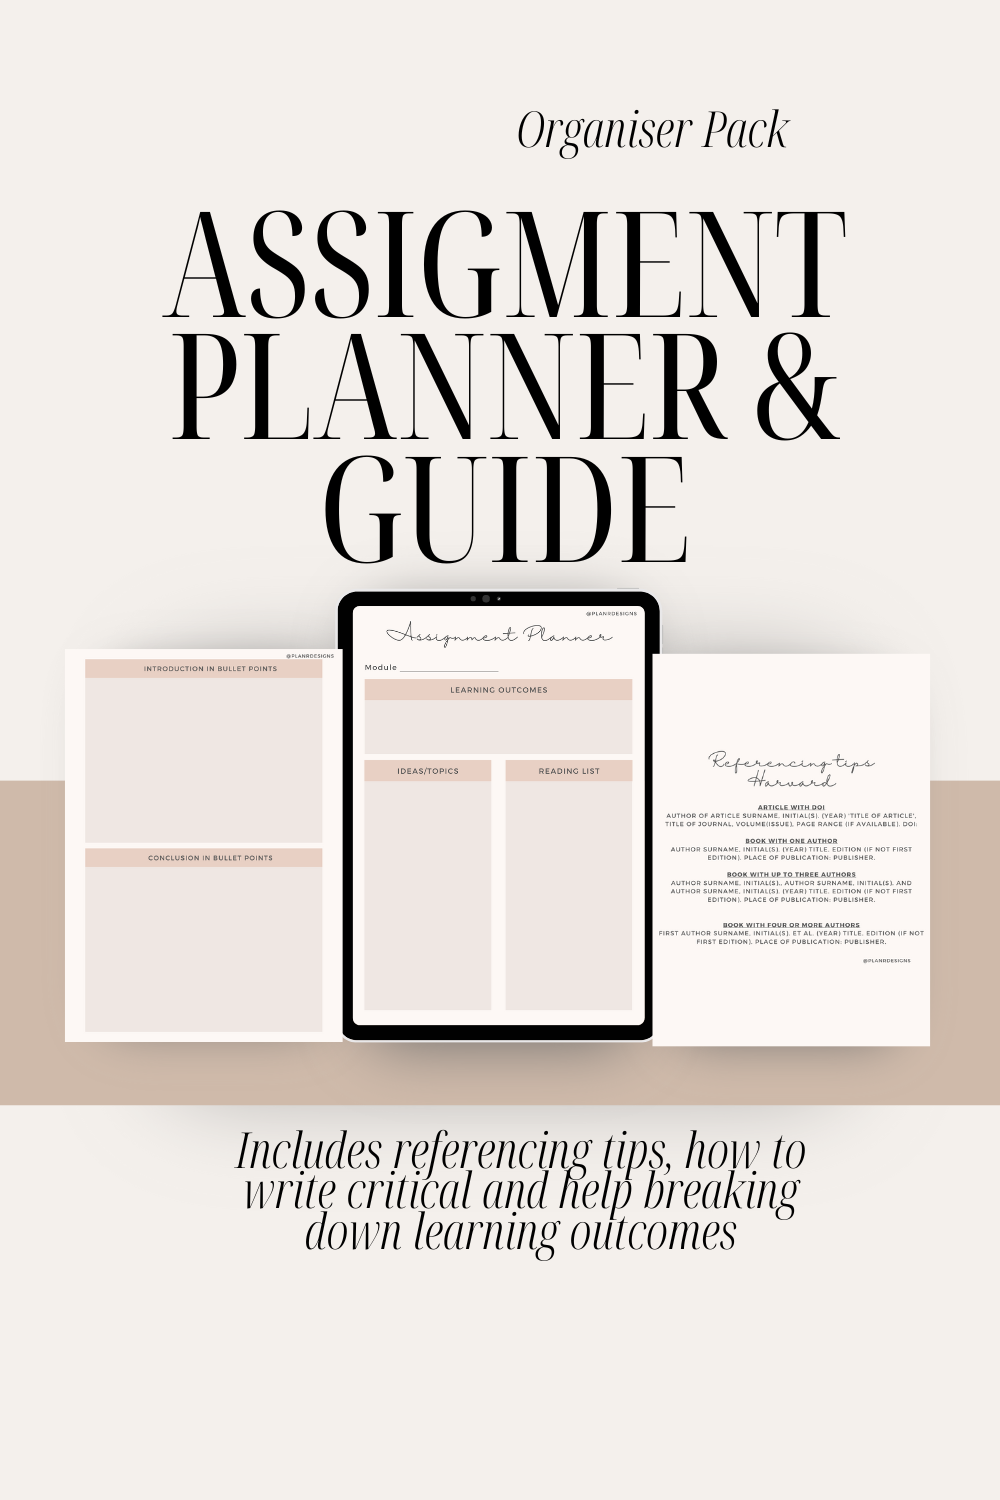 Assignment planner guide